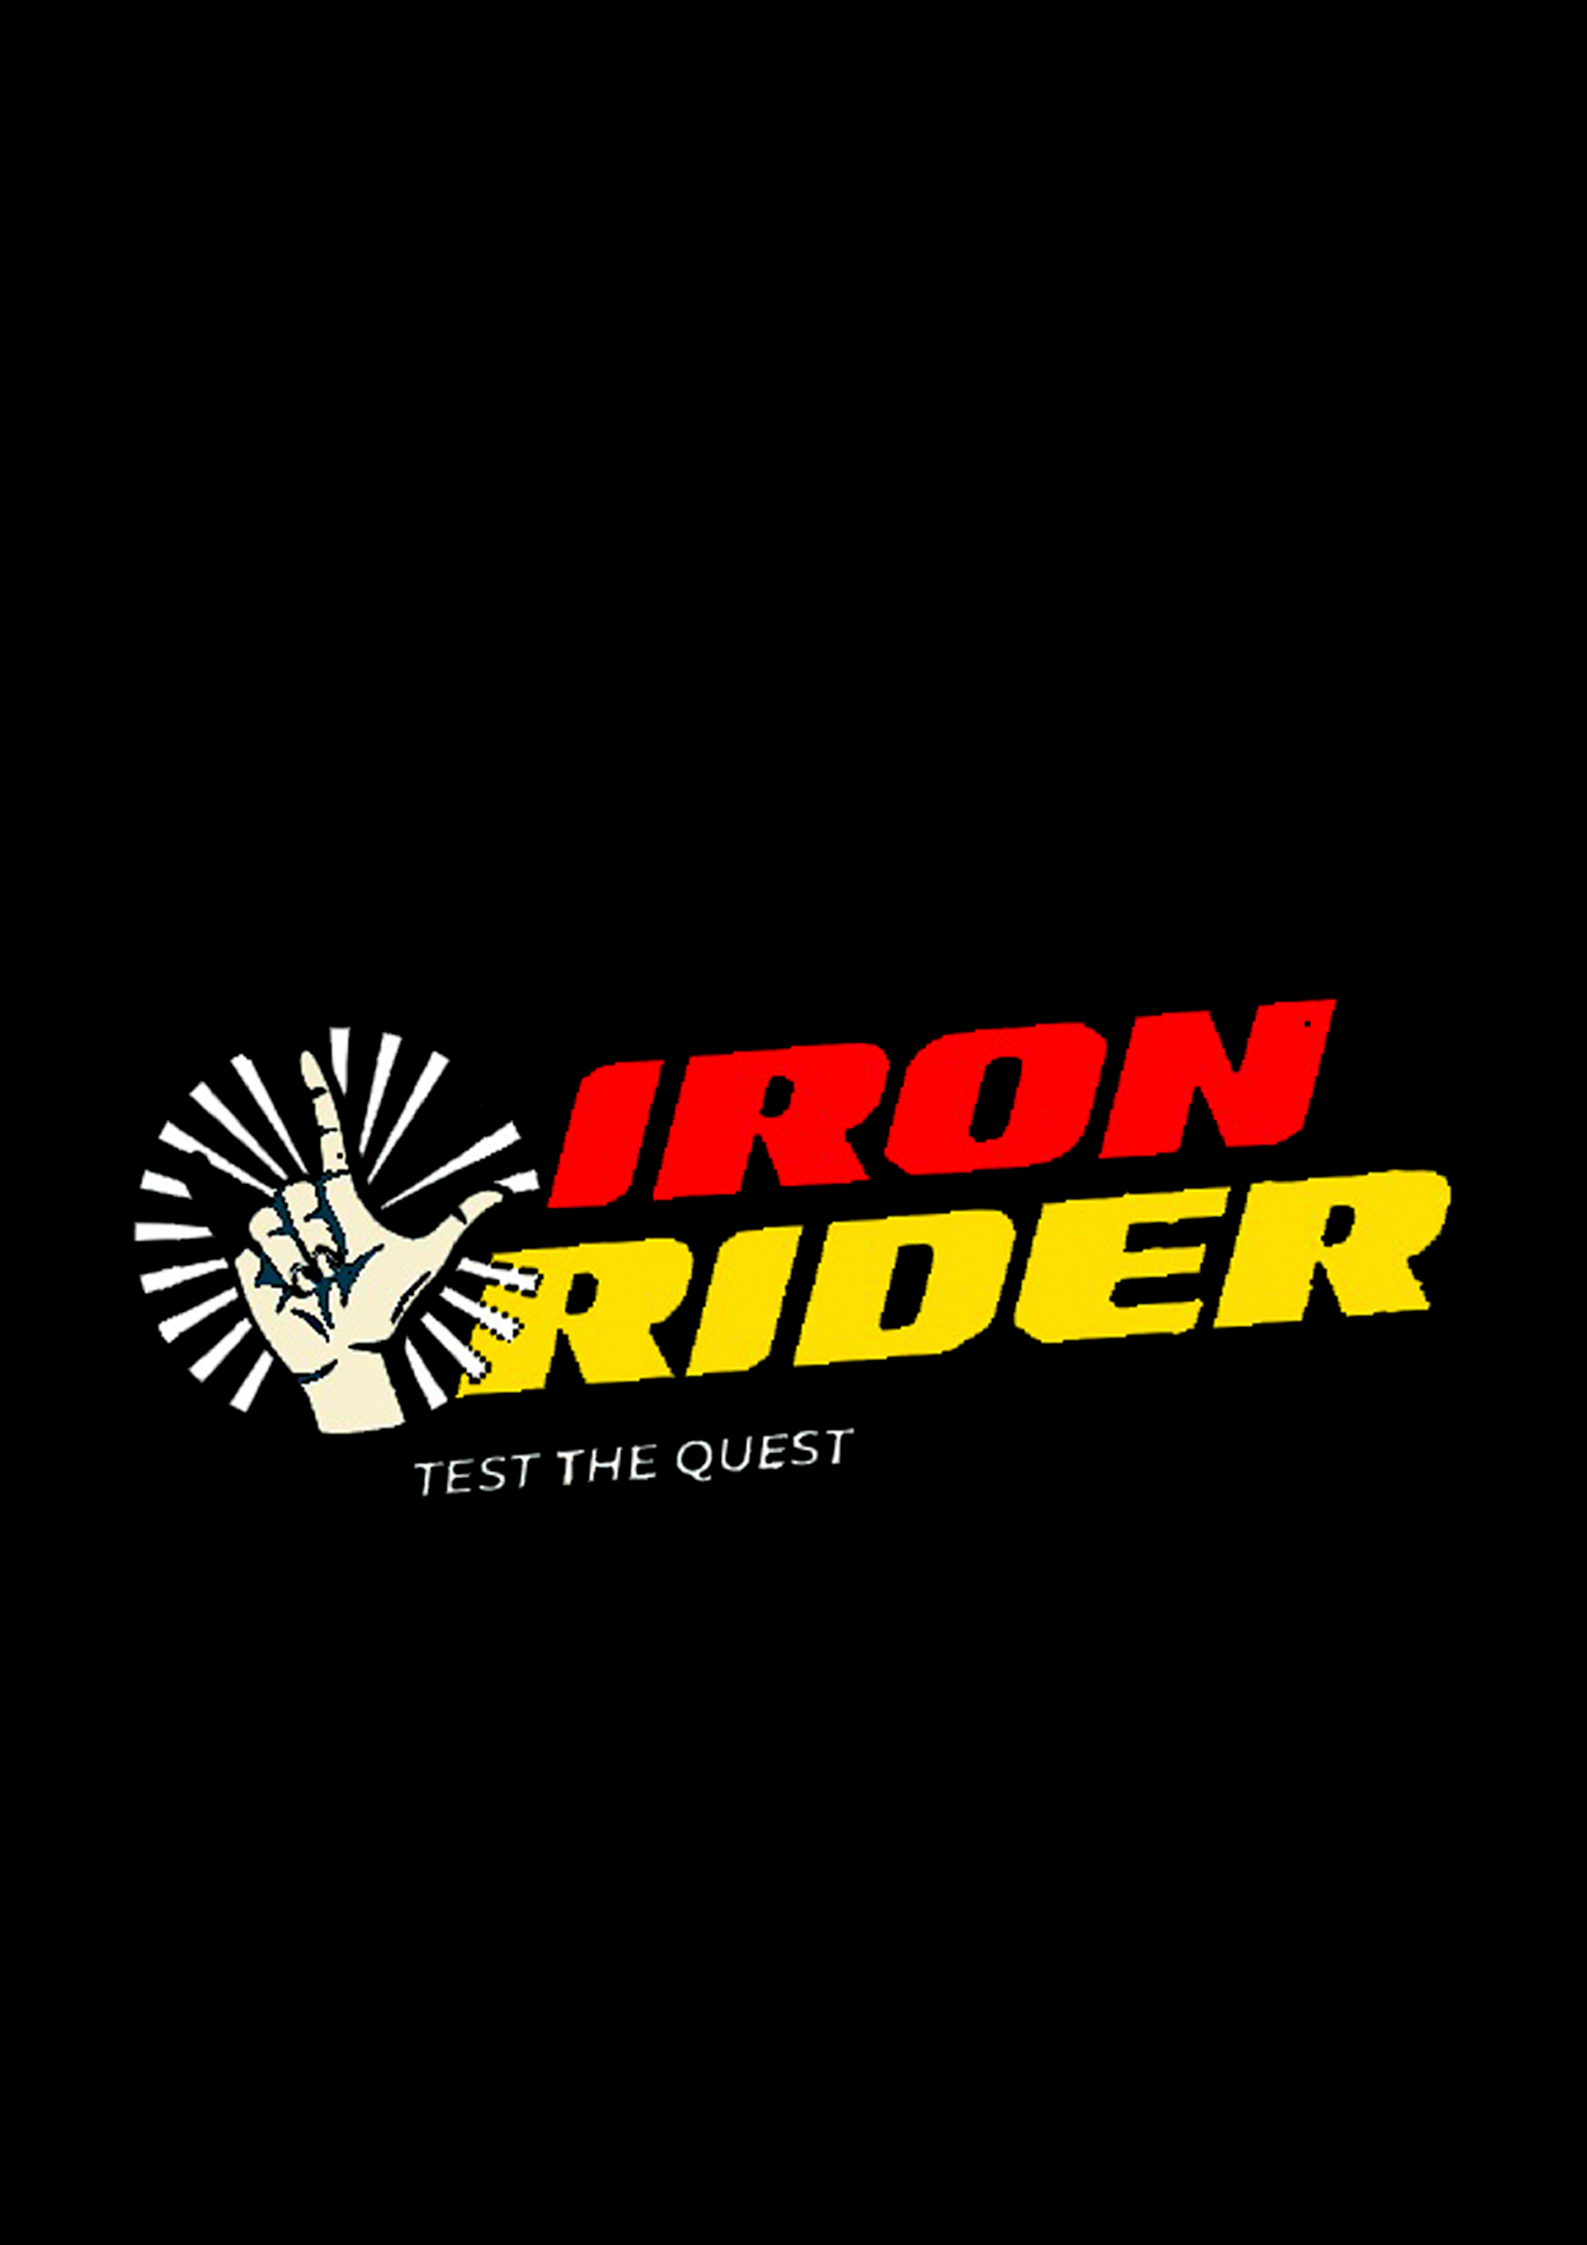 IRON RIDER | TEST THE QUEST